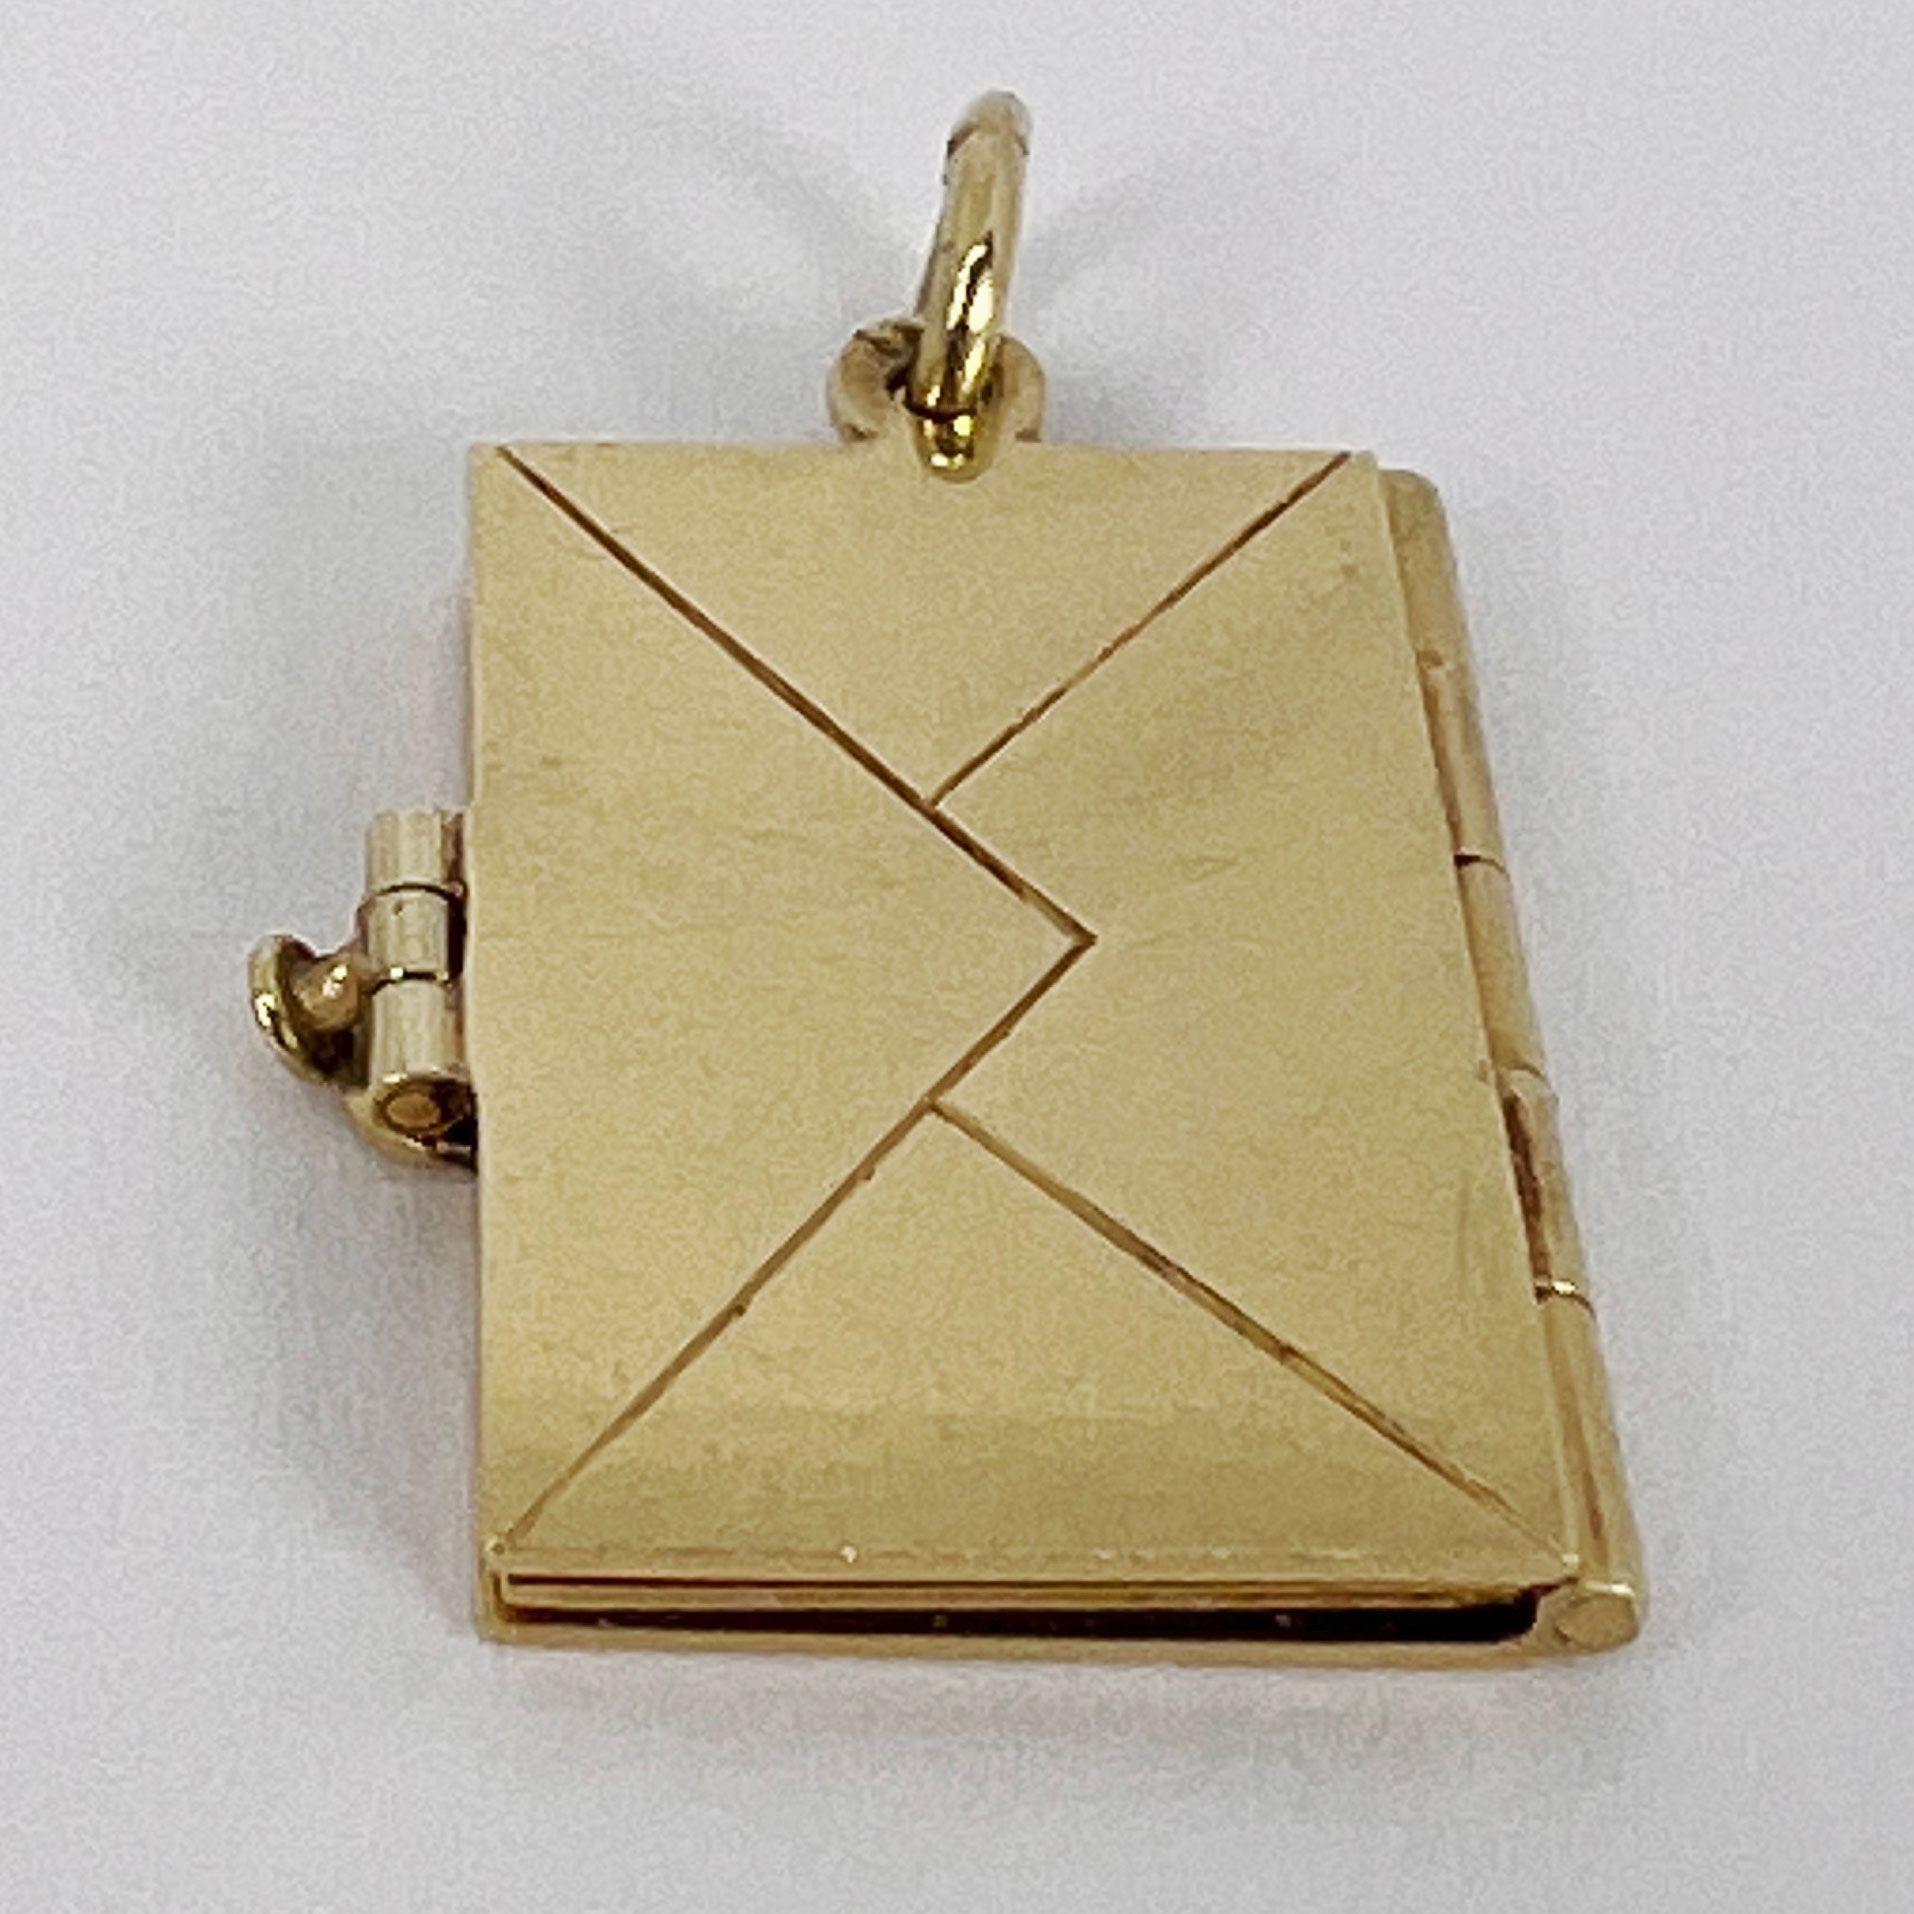 A 14 karat (14K) yellow gold charm pendant designed as an envelope with an enamel stamp which opens to show a letter page. Stamped 14K for 14 karat gold to the jump ring. Unengraved.

Dimensions: 2 x 1.4 x 0.2 cm (not including jump ring)
Weight: